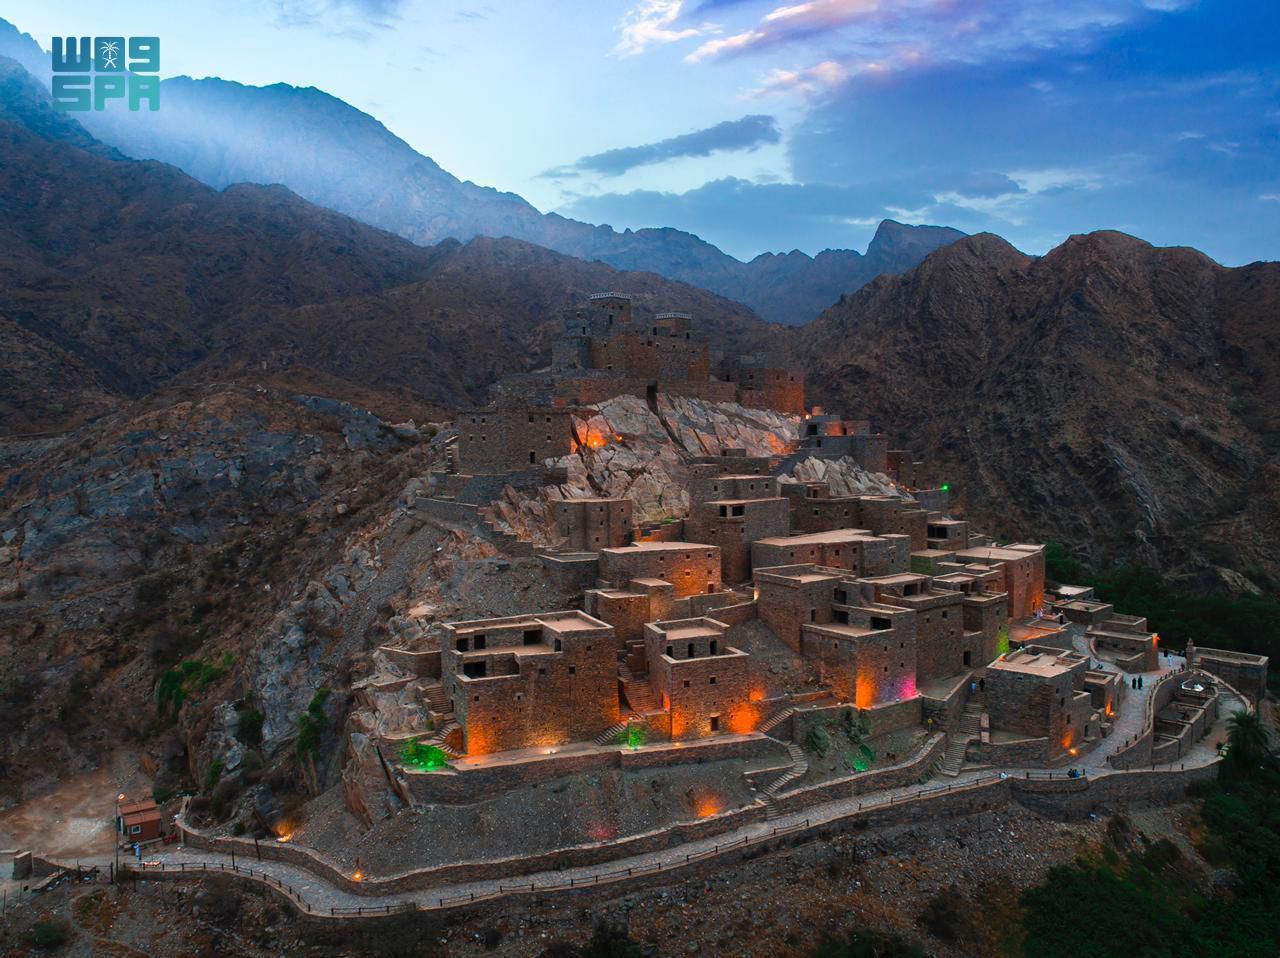 Saudi Arabia’s tourism fund signs deal to develop new project in Al Baha